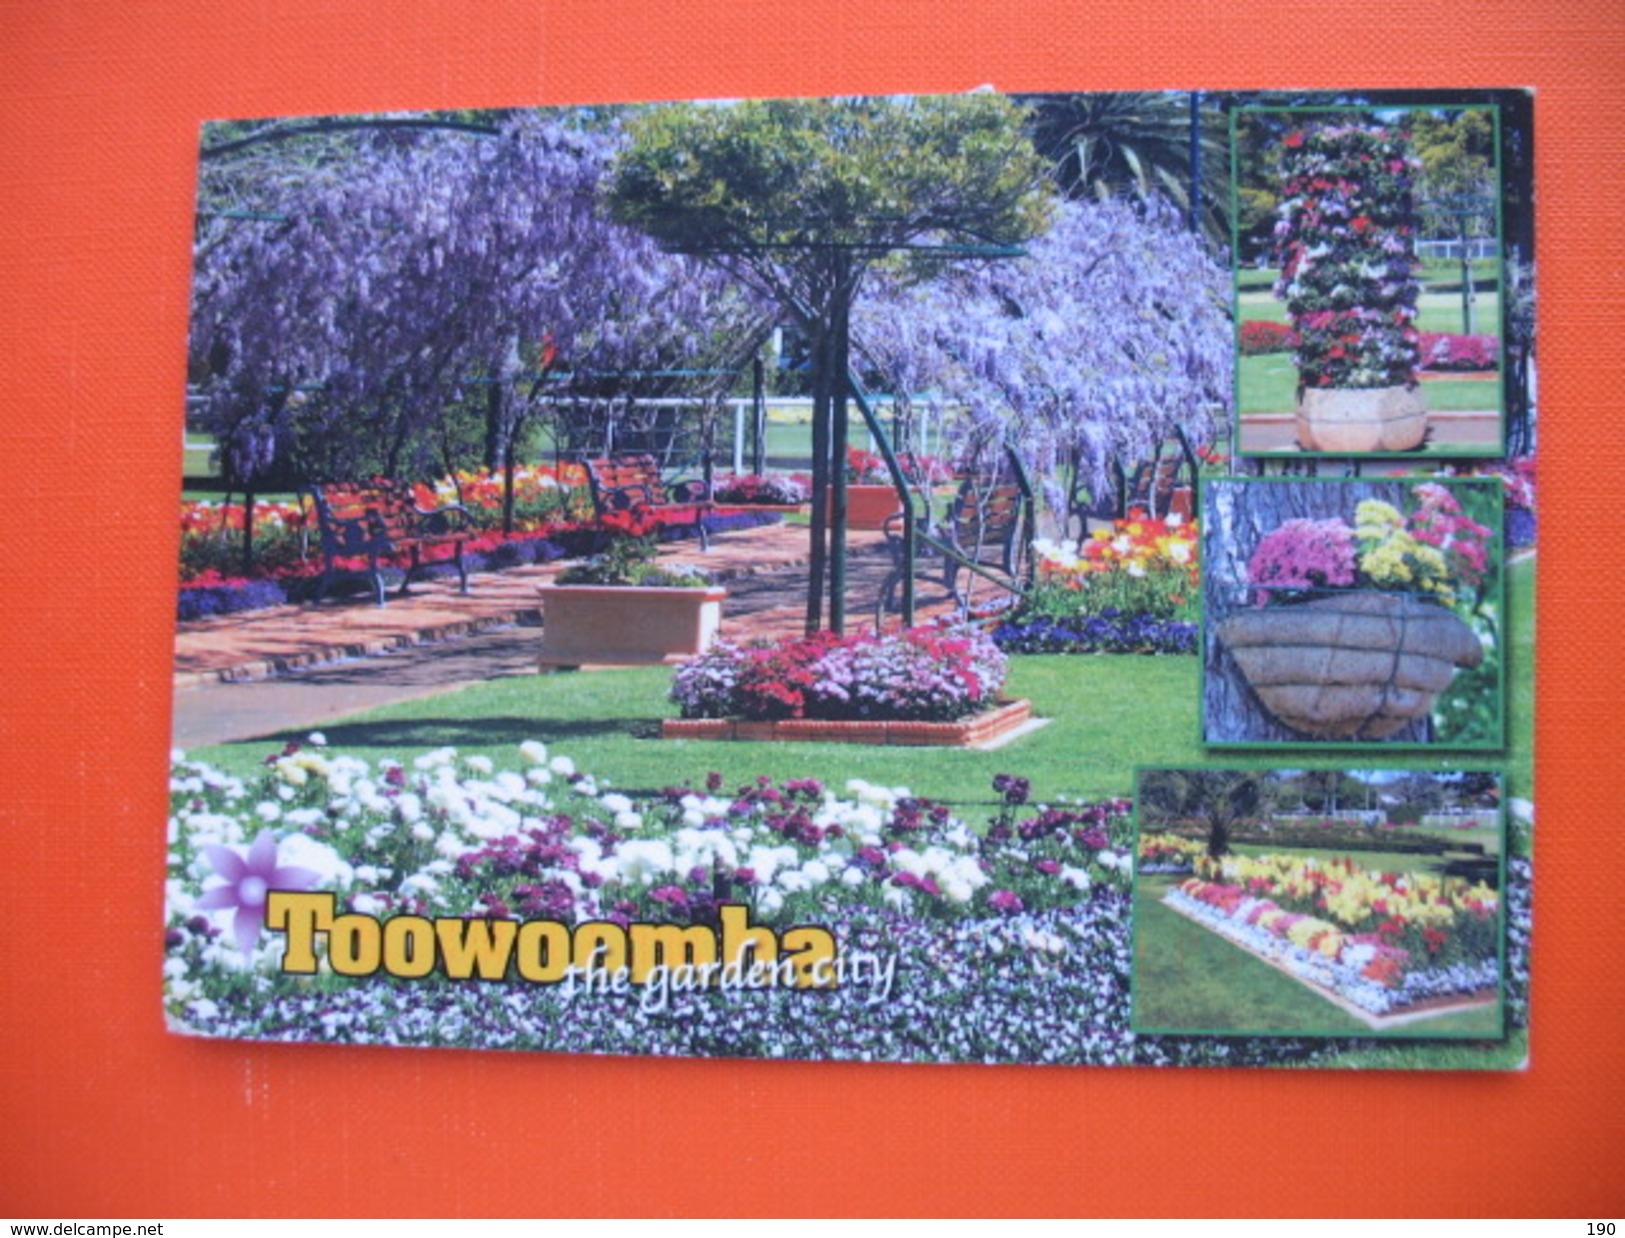 Toowoomba,the Garden City - Towoomba / Darling Downs